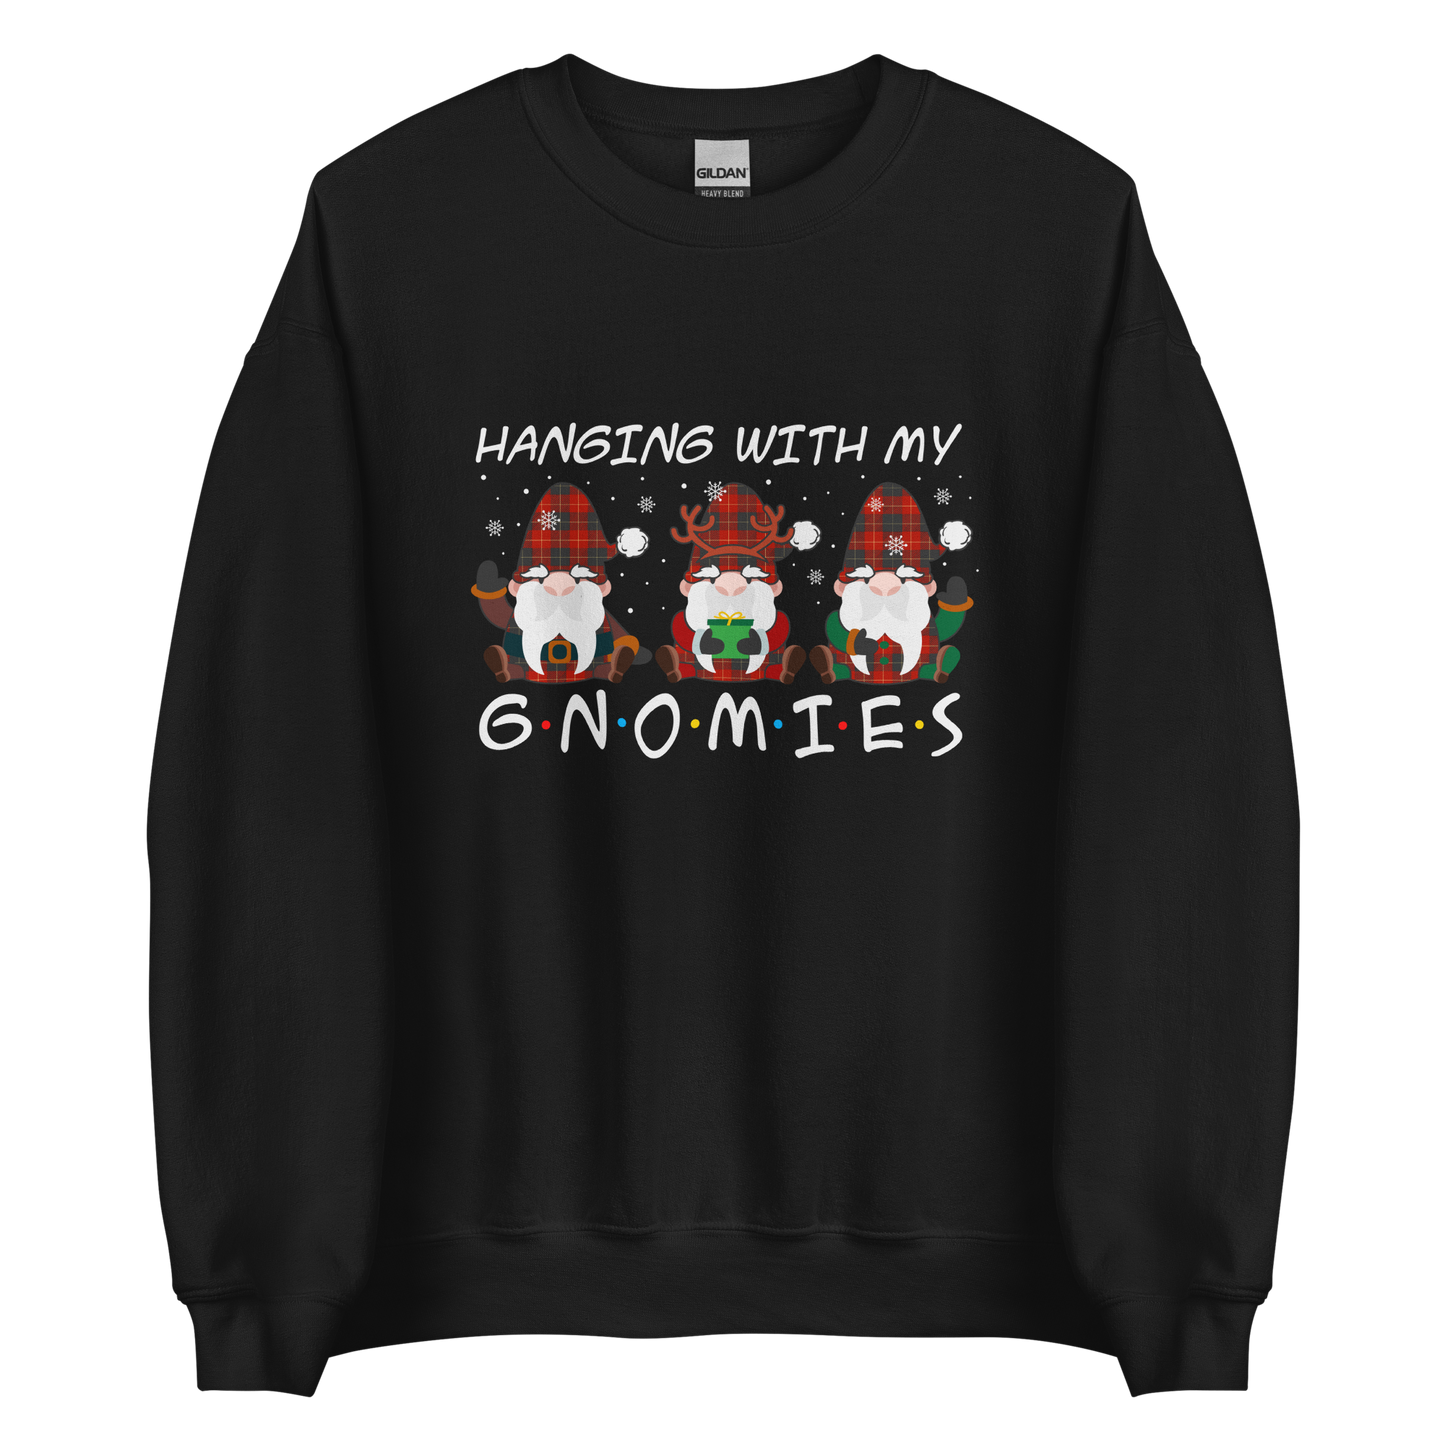 Black Christmas Gnome Sweatshirt featuring a delight Hanging With My Gnomies graphic on the chest - Funny Christmas Graphic Gnome Sweatshirts - Boozy Fox